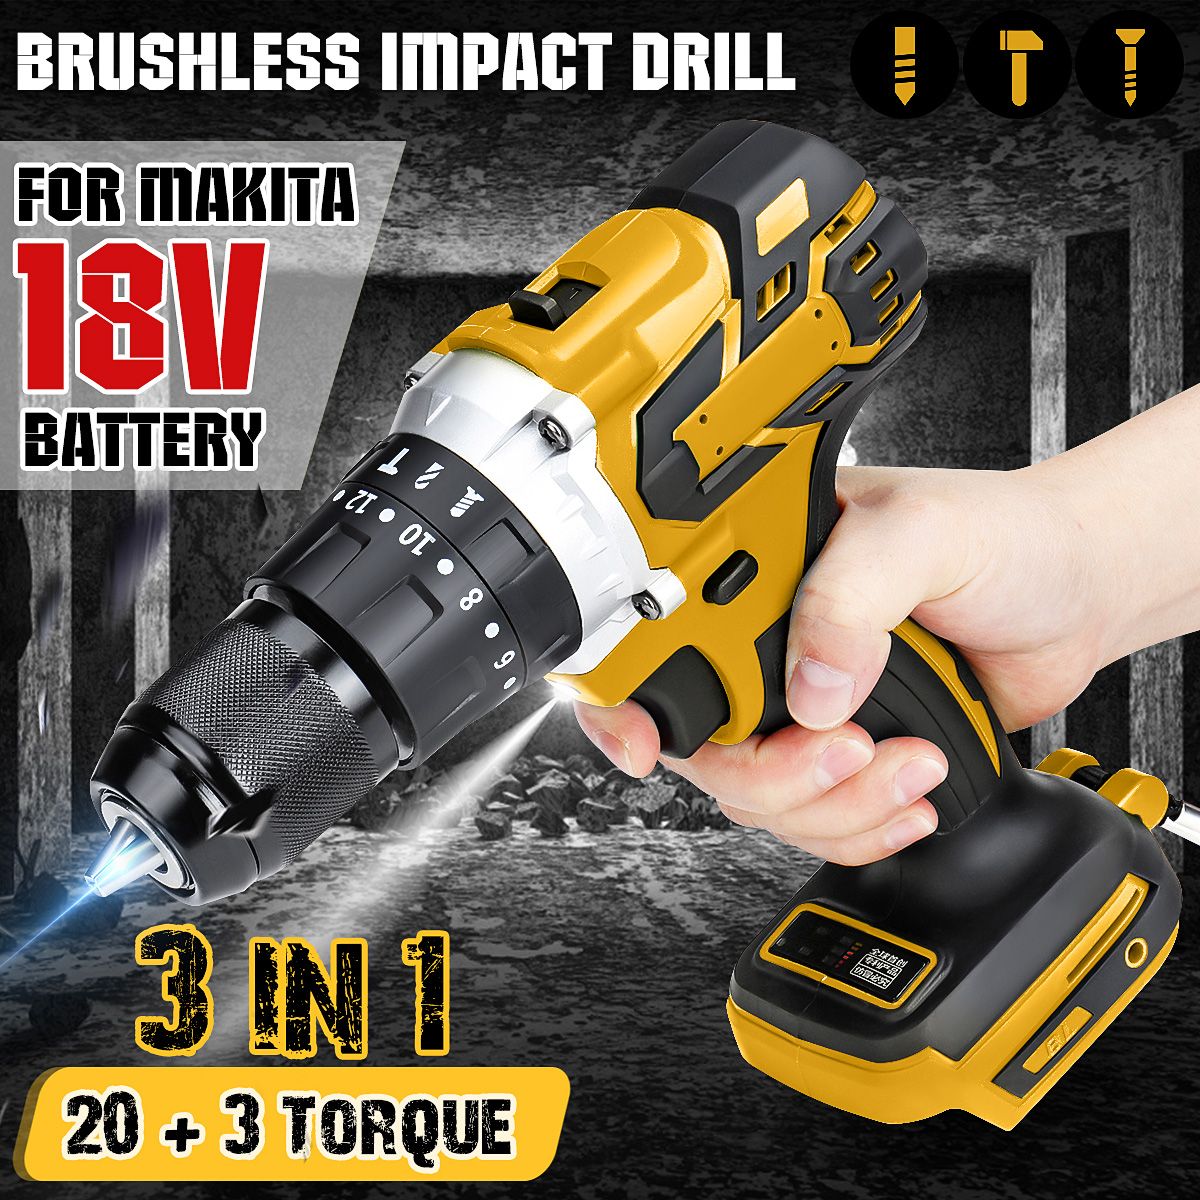 13mm-3-In-1-Brushless-Impact-Drill-Hammer-Cordless-Elctric-Hammer-Drill-Adapted-To-18V-Makita-Batter-1715080